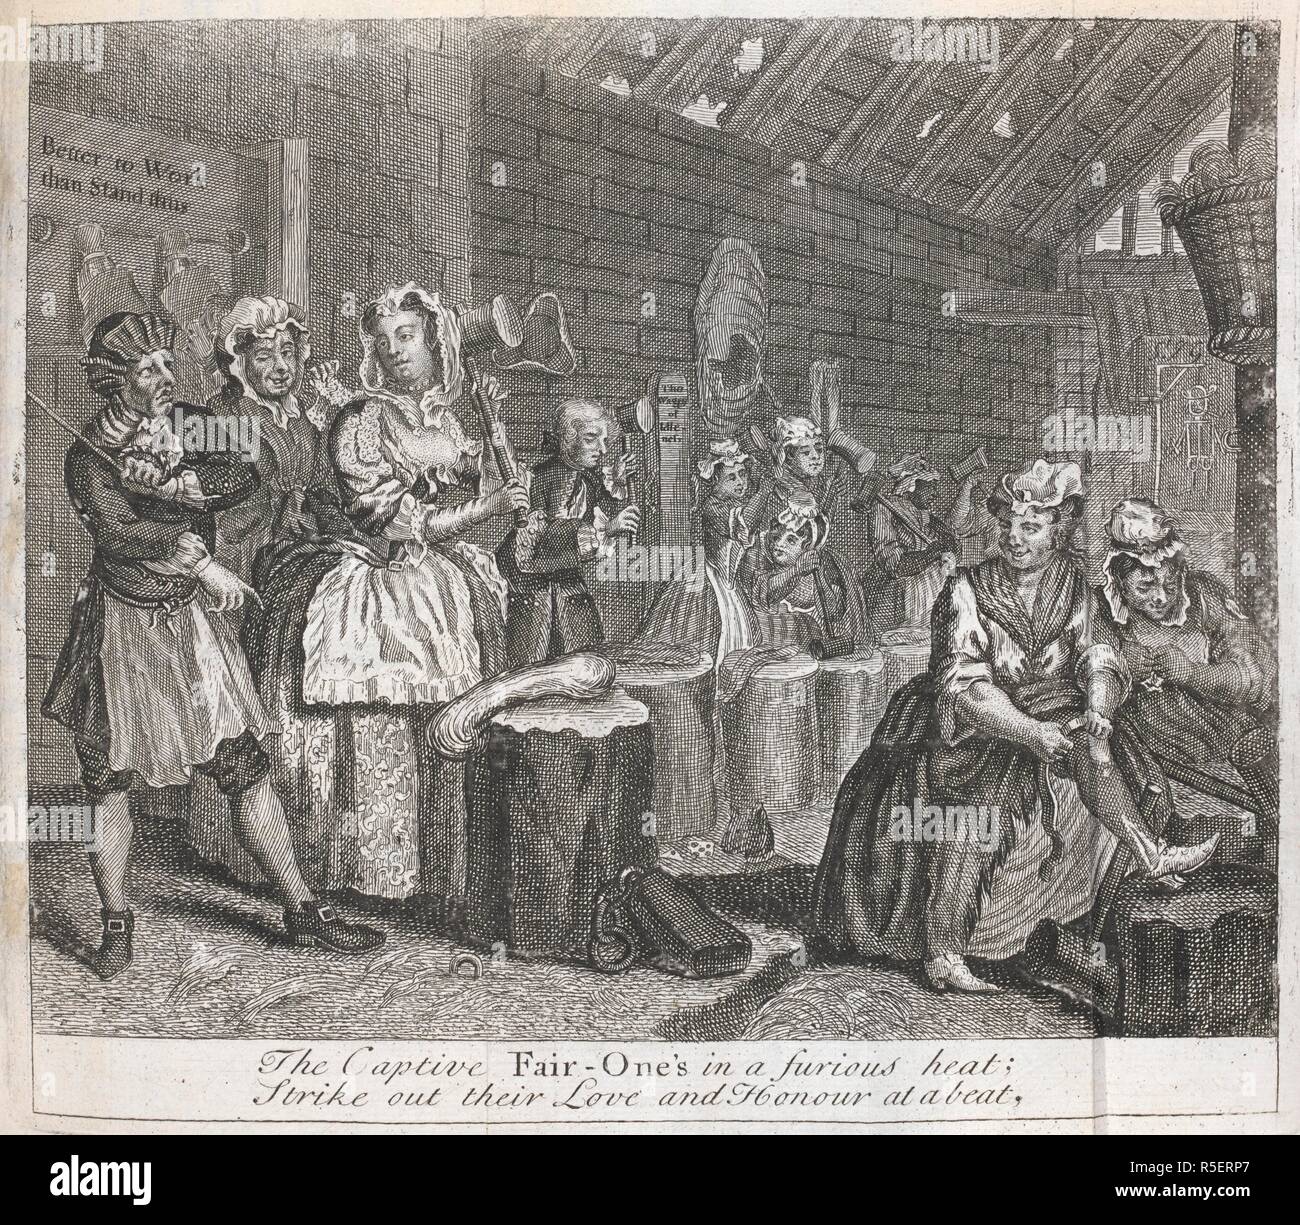 Scene 4: She and her maid are send to Bridewell and set at hard labour. . The Lure of Venus: or, a Harlot's progress. An heroi-comical poem. In six cantos ... Founded upon Mr. Hogarth's six paintings; and illustrated with prints of them. London, 1733. 'The captive Fair-One's in a furious heat; Strike out their Love and Honour at a beat,'. Source: 11661.b.27. Plate IV. Author: HOGARTH, WILLIAM. Breval, John Durant. Stock Photo